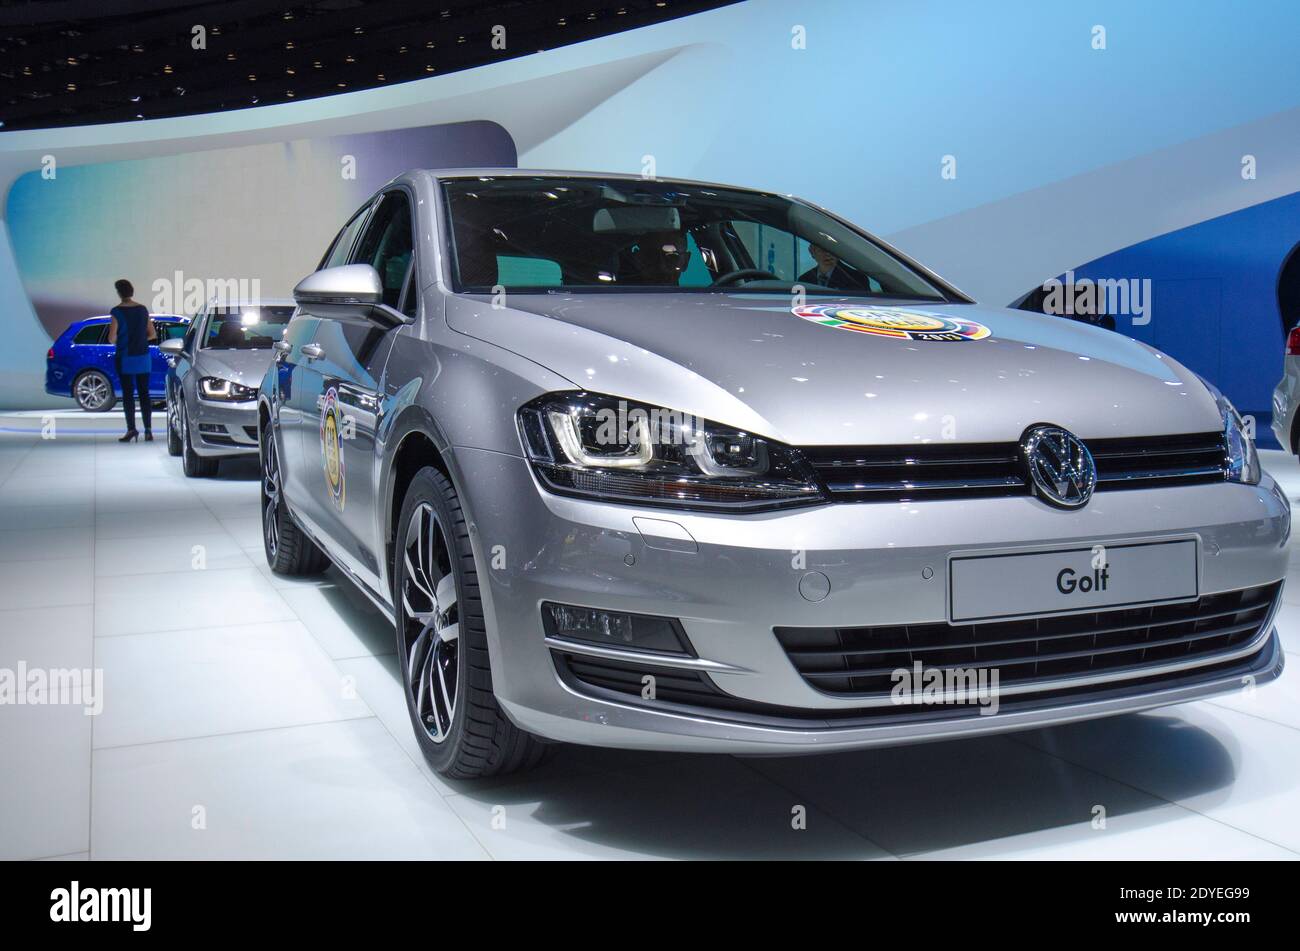 Volkswagen Golf VII, car of the year 2012 and 2013, pictured during the  83rd International Geneva Motor Show, in Geneva, Switzerland on March 6,  2013. Photo by Gilles Bertrand/ABACAPRESS.COM Stock Photo - Alamy